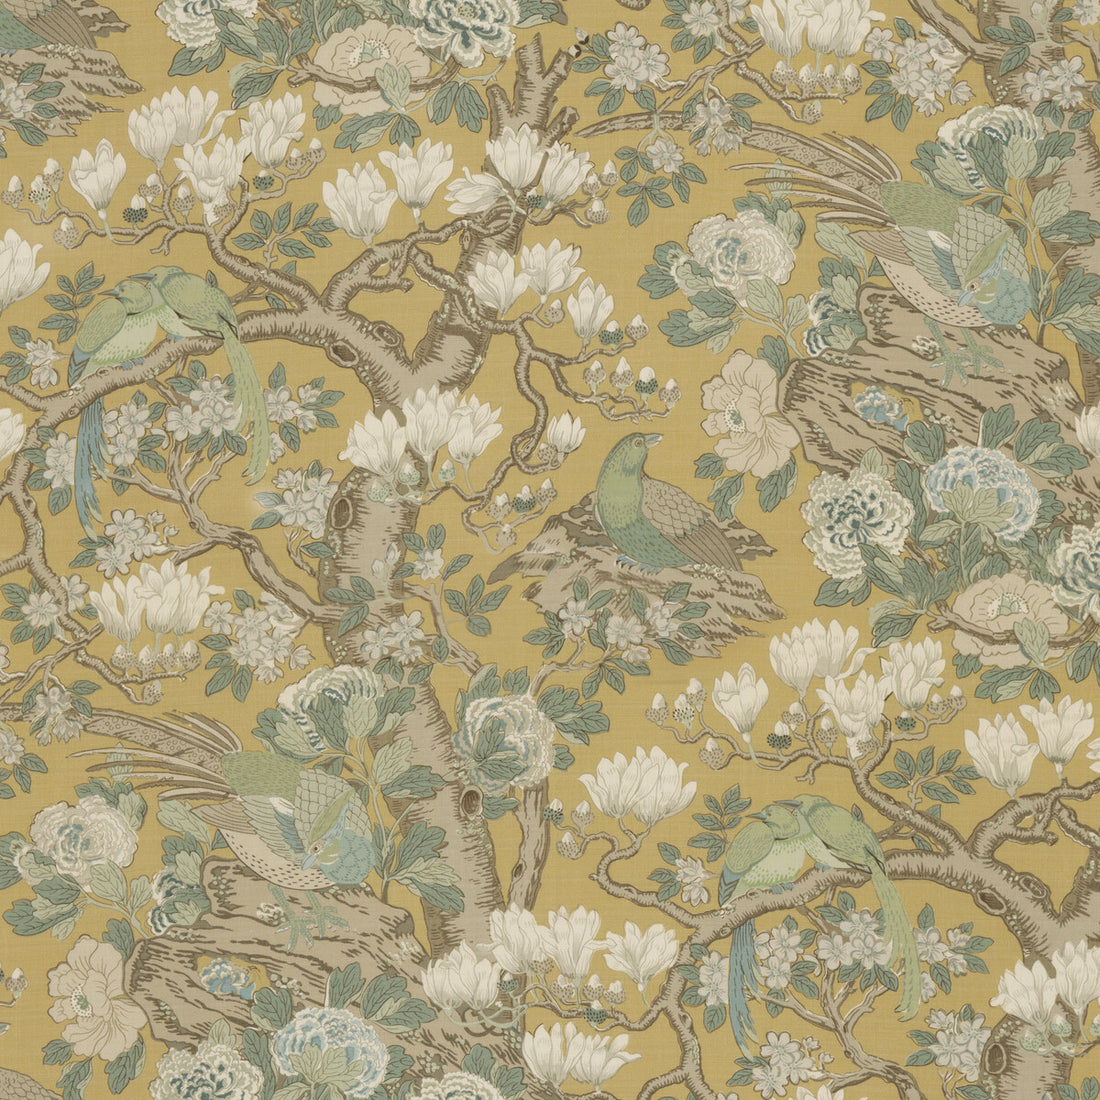 Rockbird Signature fabric in ochre color - pattern BP10773.4.0 - by G P &amp; J Baker in the Signature Prints collection